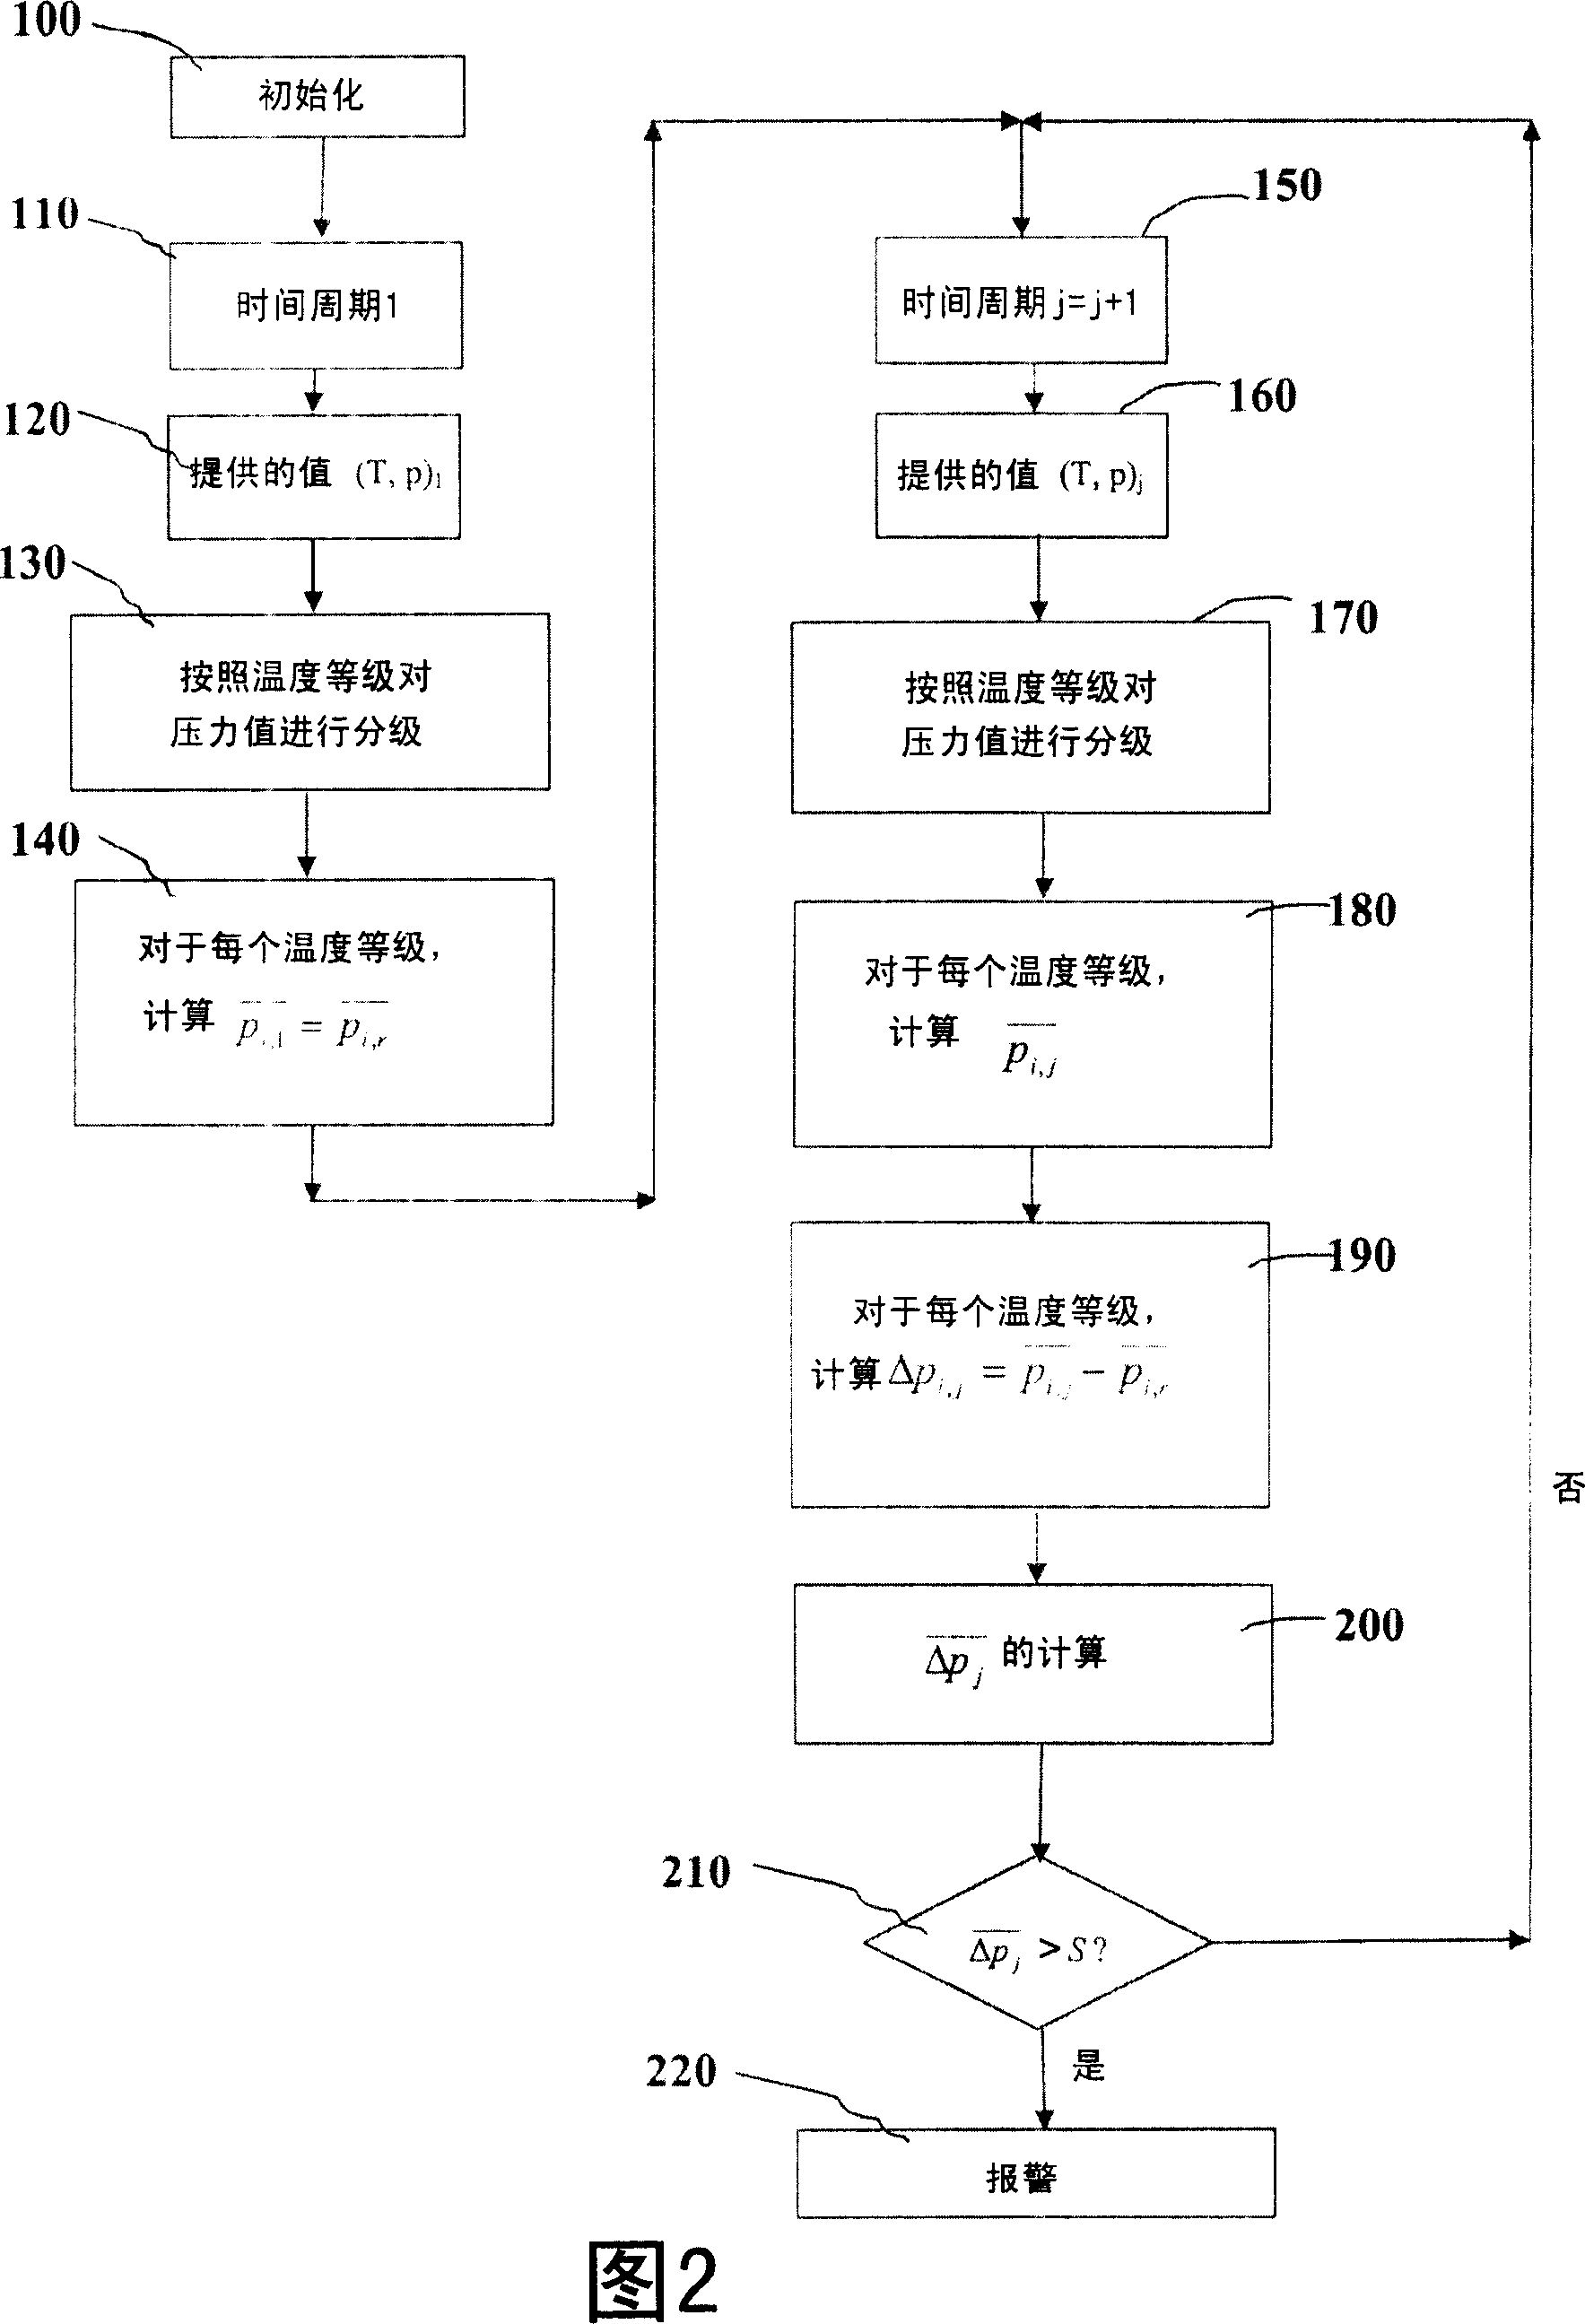 Method of processing data in a vehicle tyre monitoring system